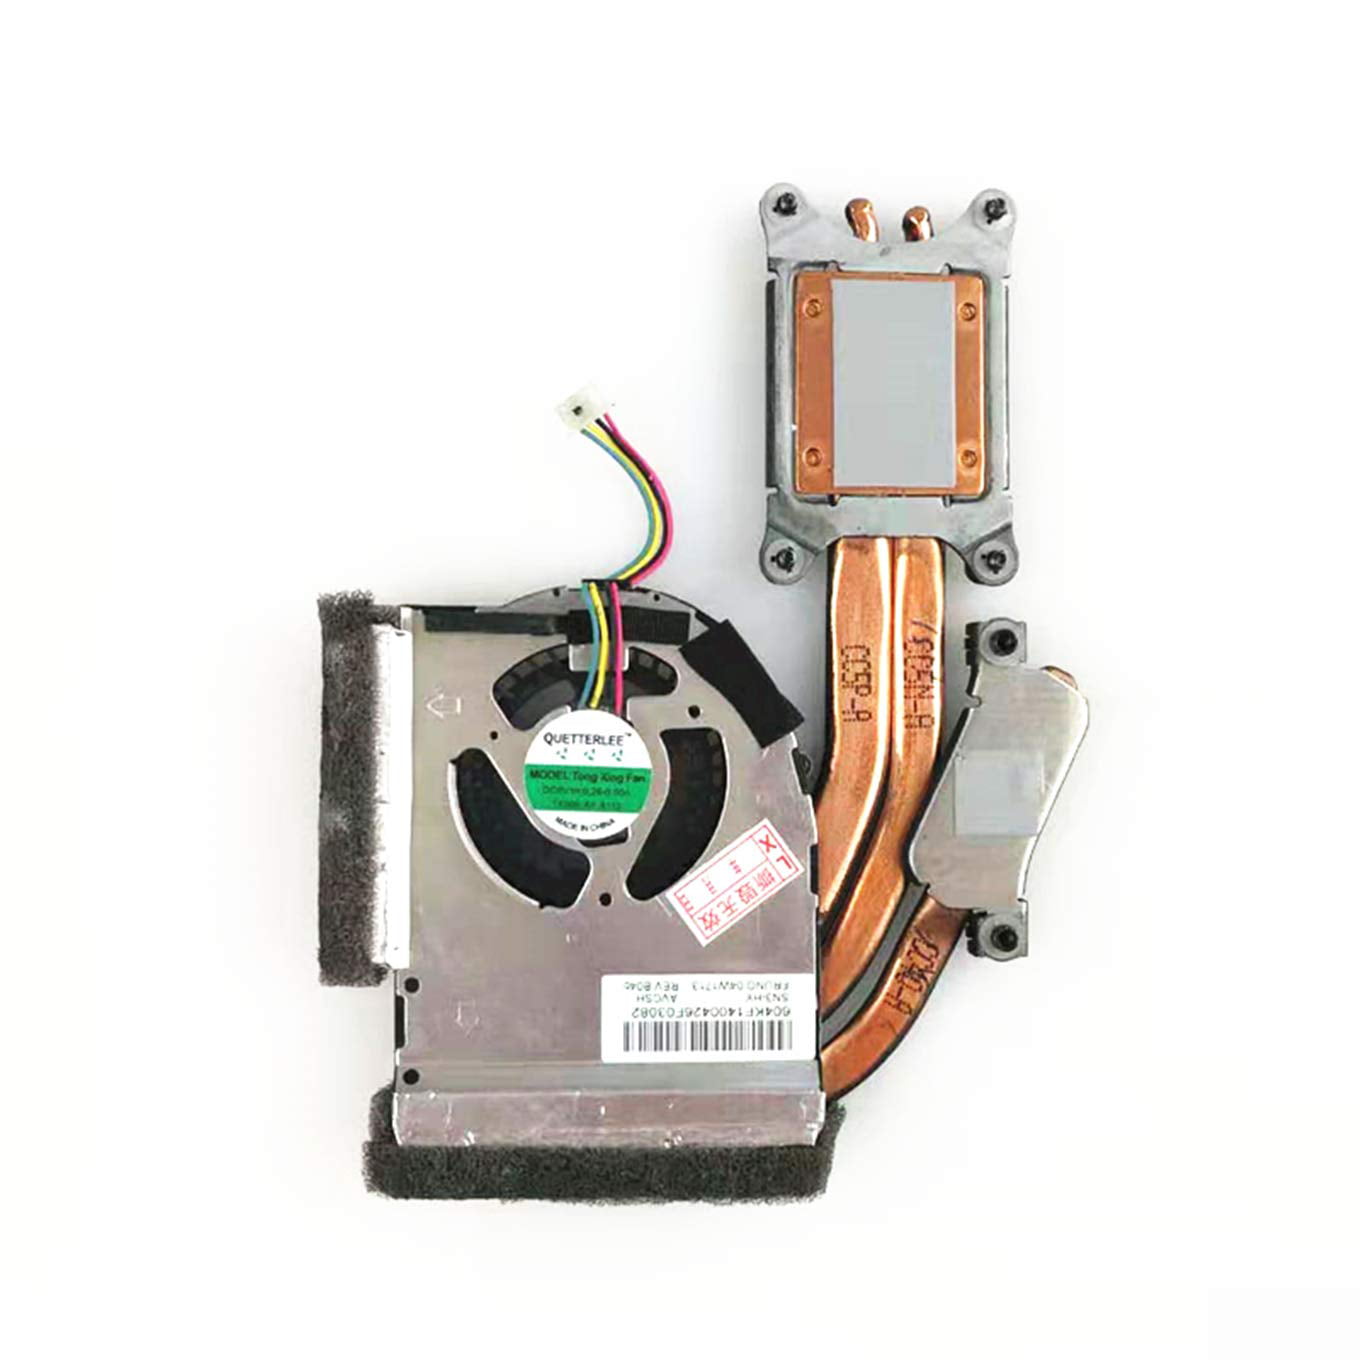 Replacement New Independent Graphics Heatsink Fan for Lenovo Thinkpad T420S T420SI Series, | Walmart Canada